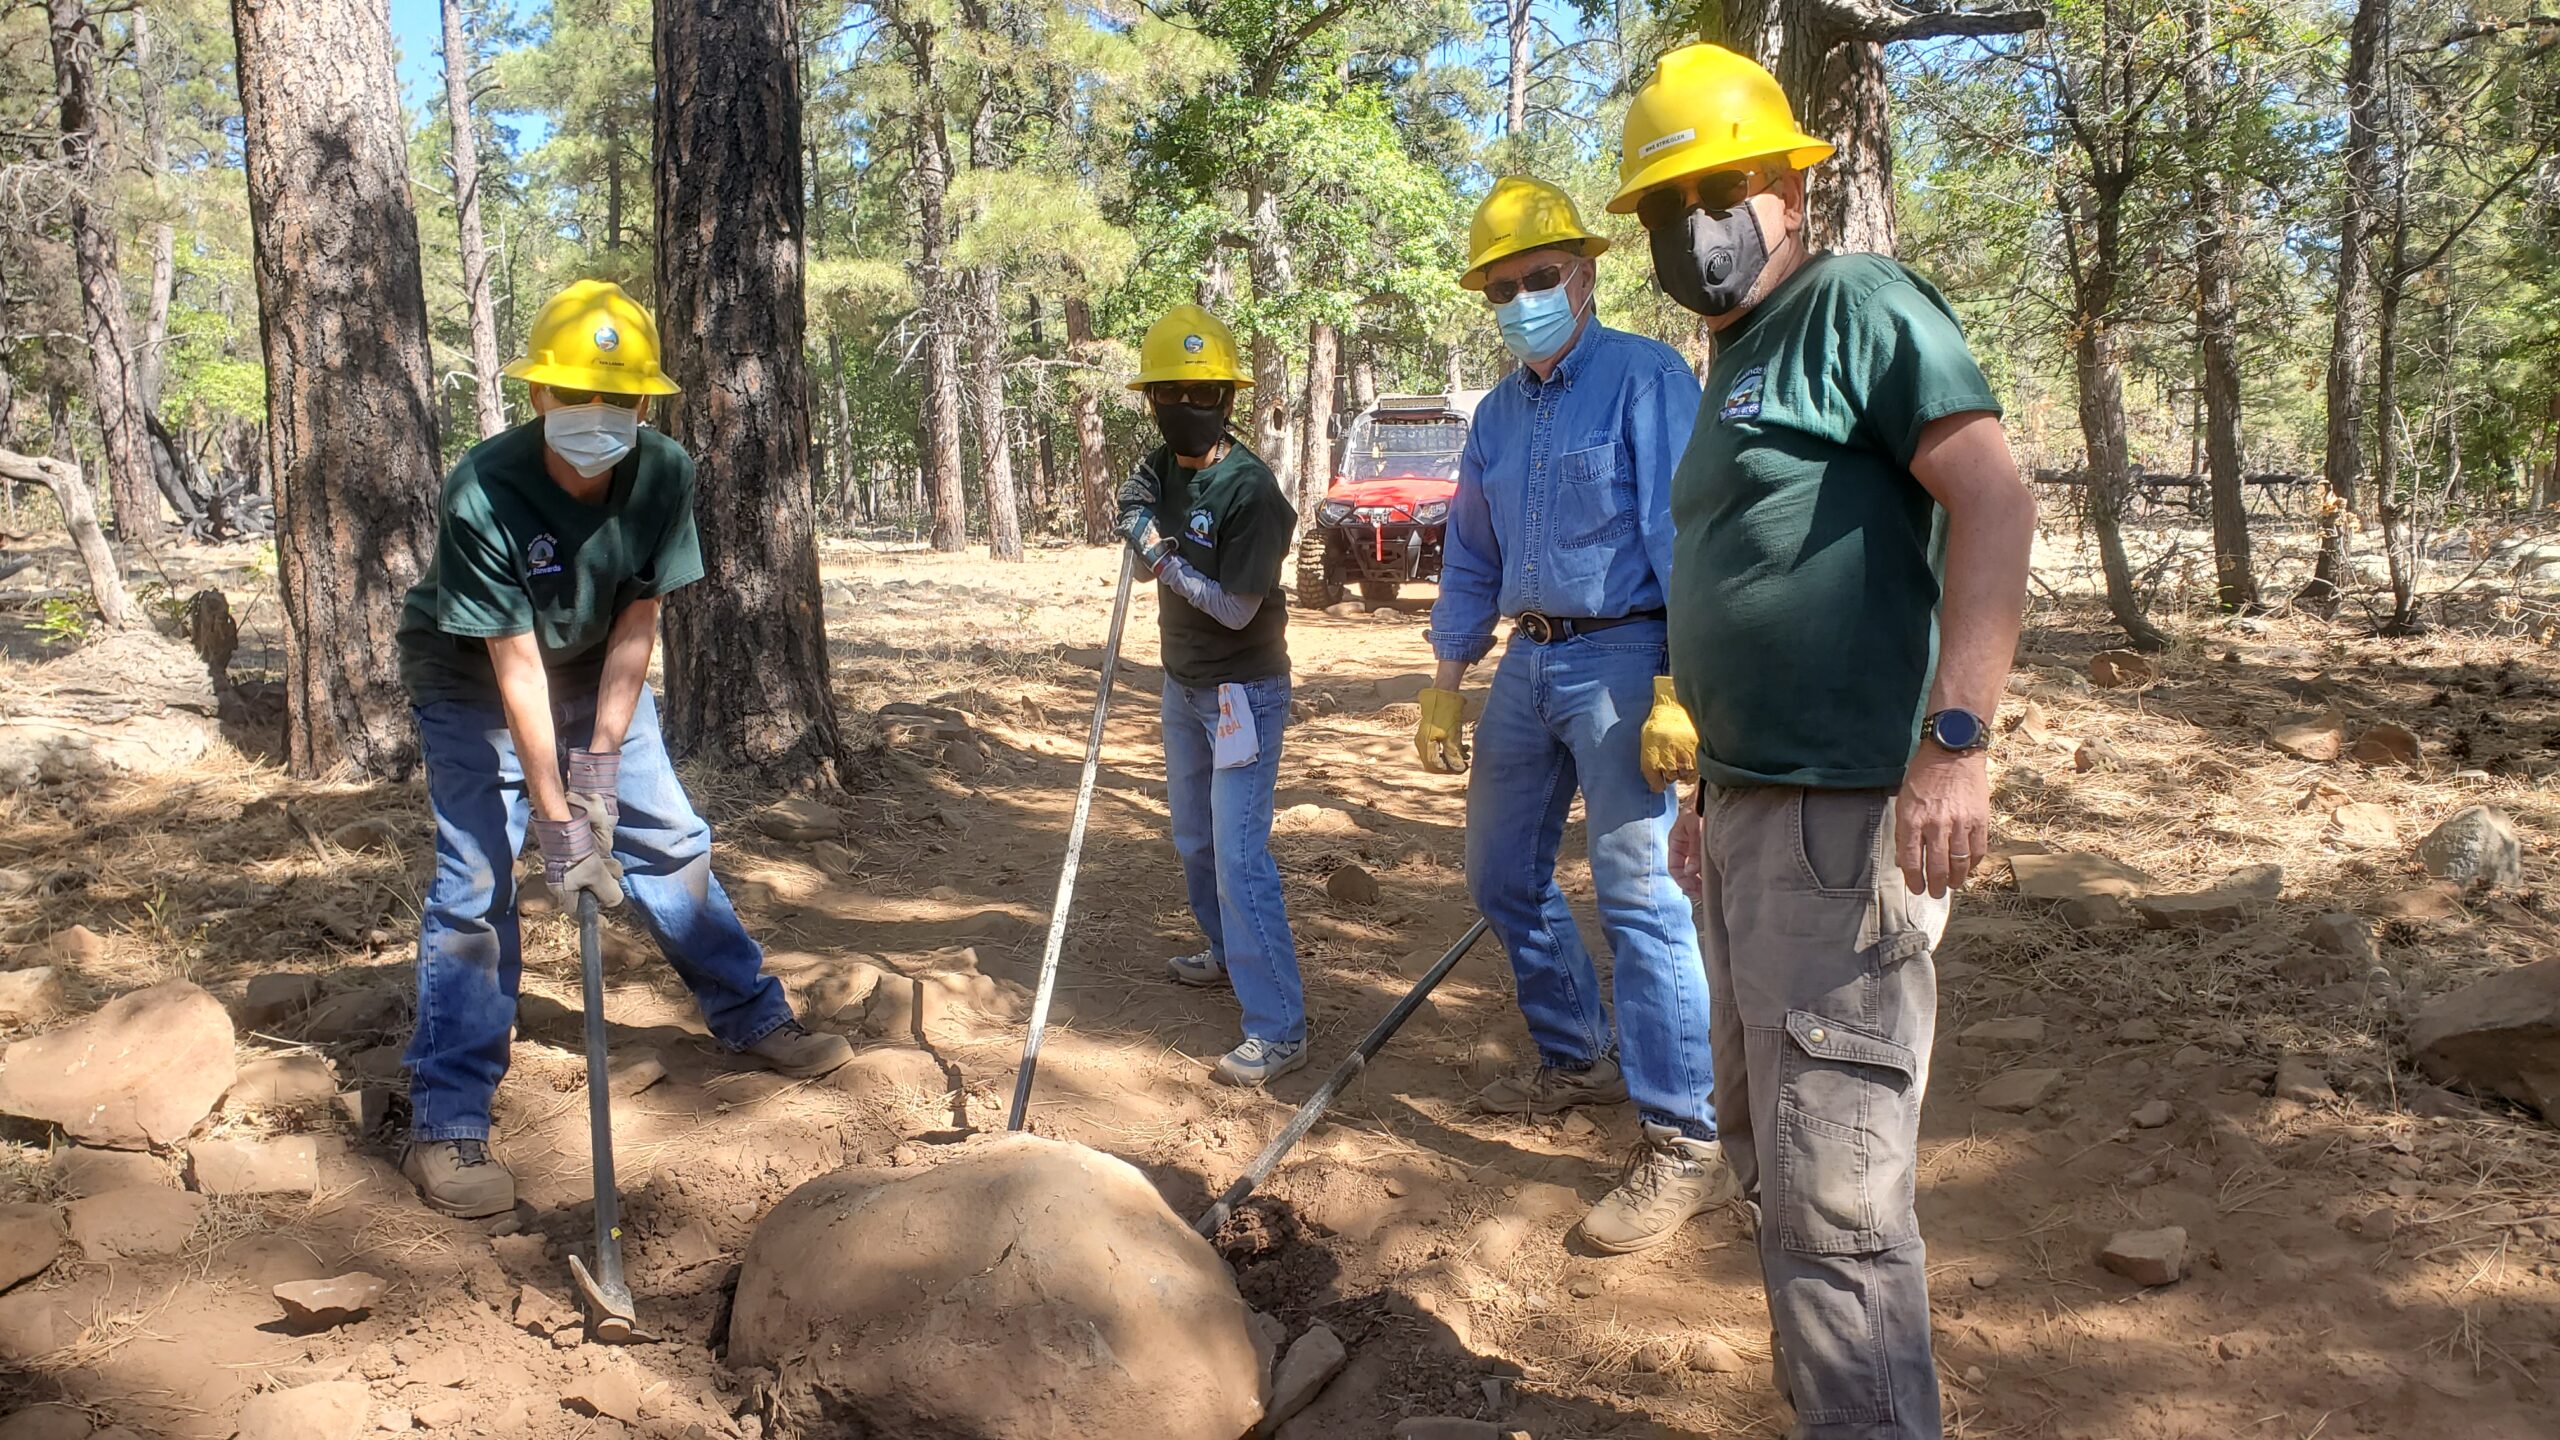 Boulder removal on the Frog Tank Connector Trial. (left to right) Ken Lasher, Mary Lasher, Tome Eade and Mike Striegler